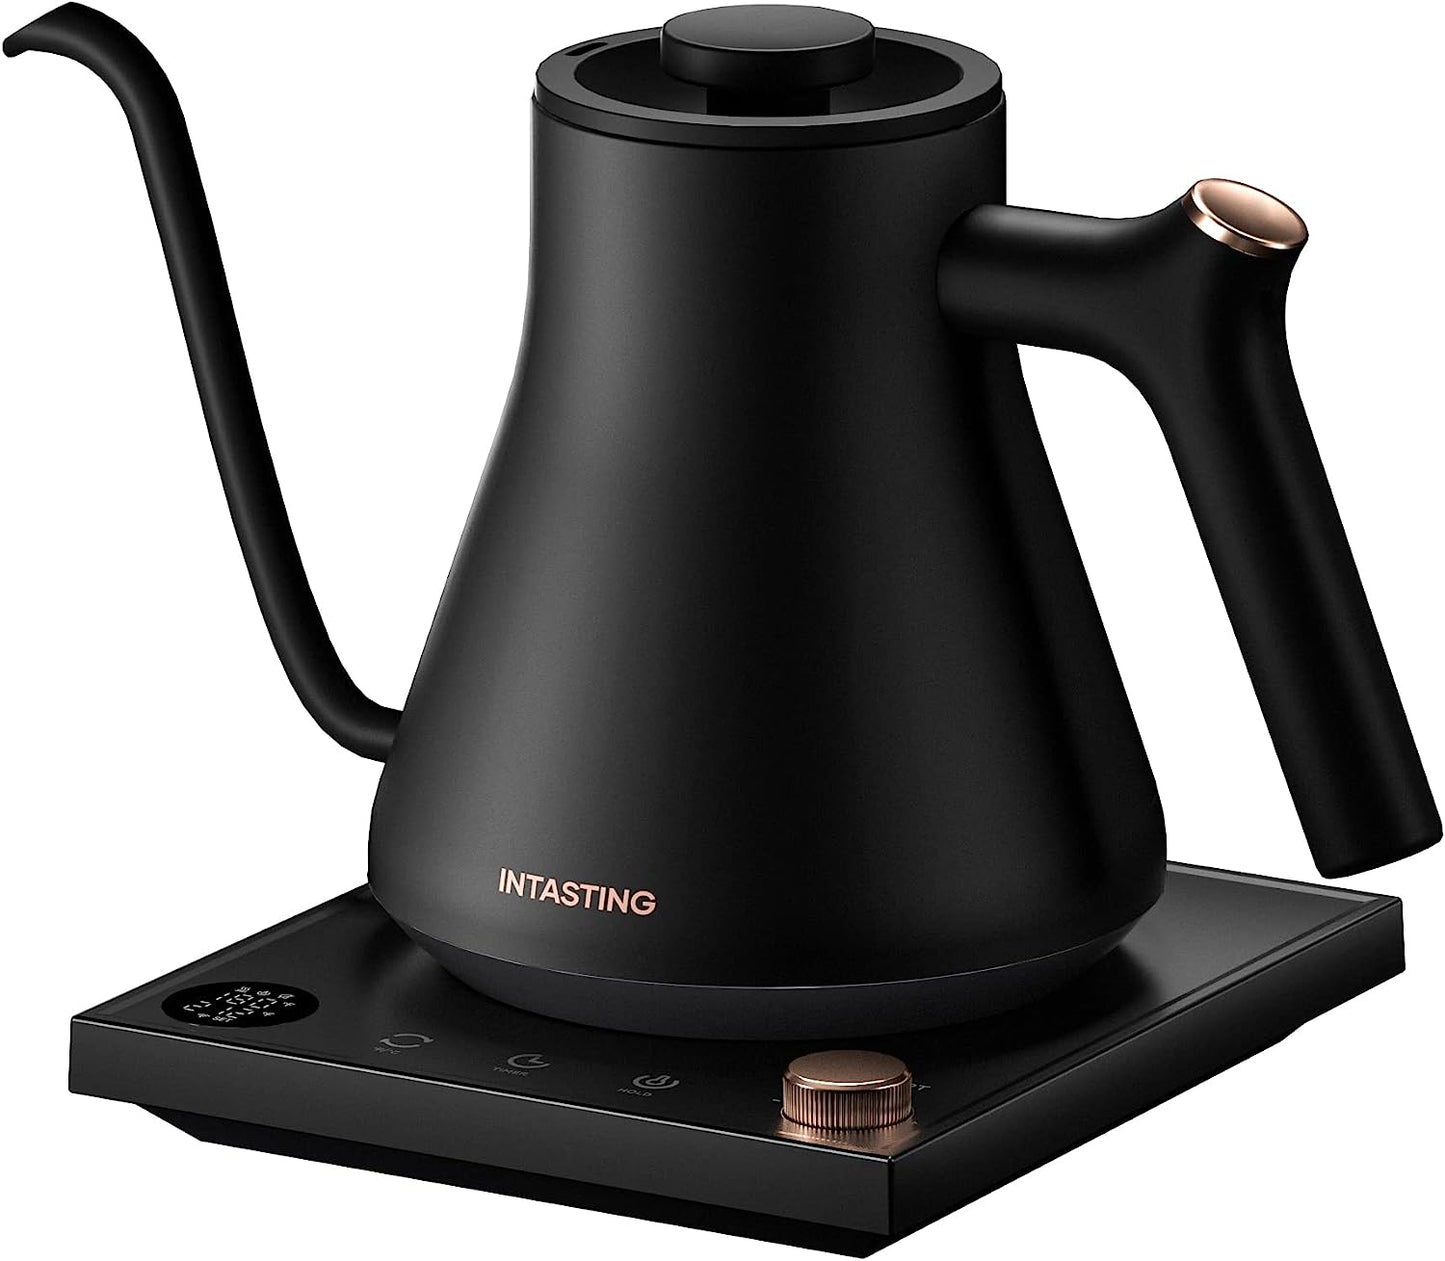 Electric Kettles, INTASTING Gooseneck Electric Kettle, ±1℉ Temperature Control, Stainless Steel Inner